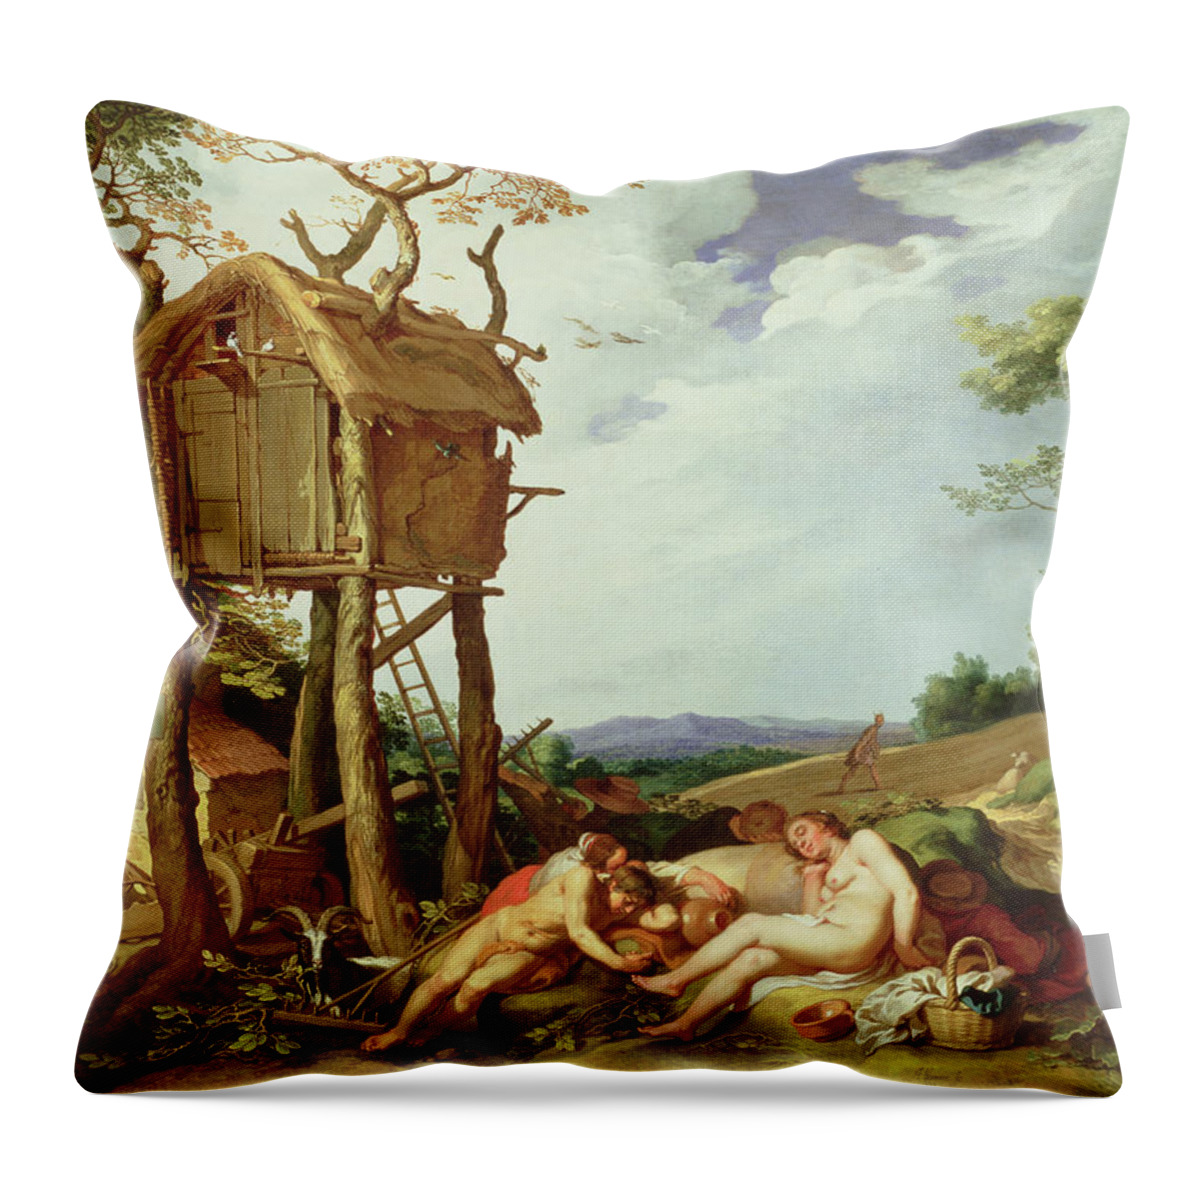 The Parable Of The Wheat And The Tares Throw Pillow featuring the painting The Parable of the Wheat and the Tares by Abraham Bloemaert